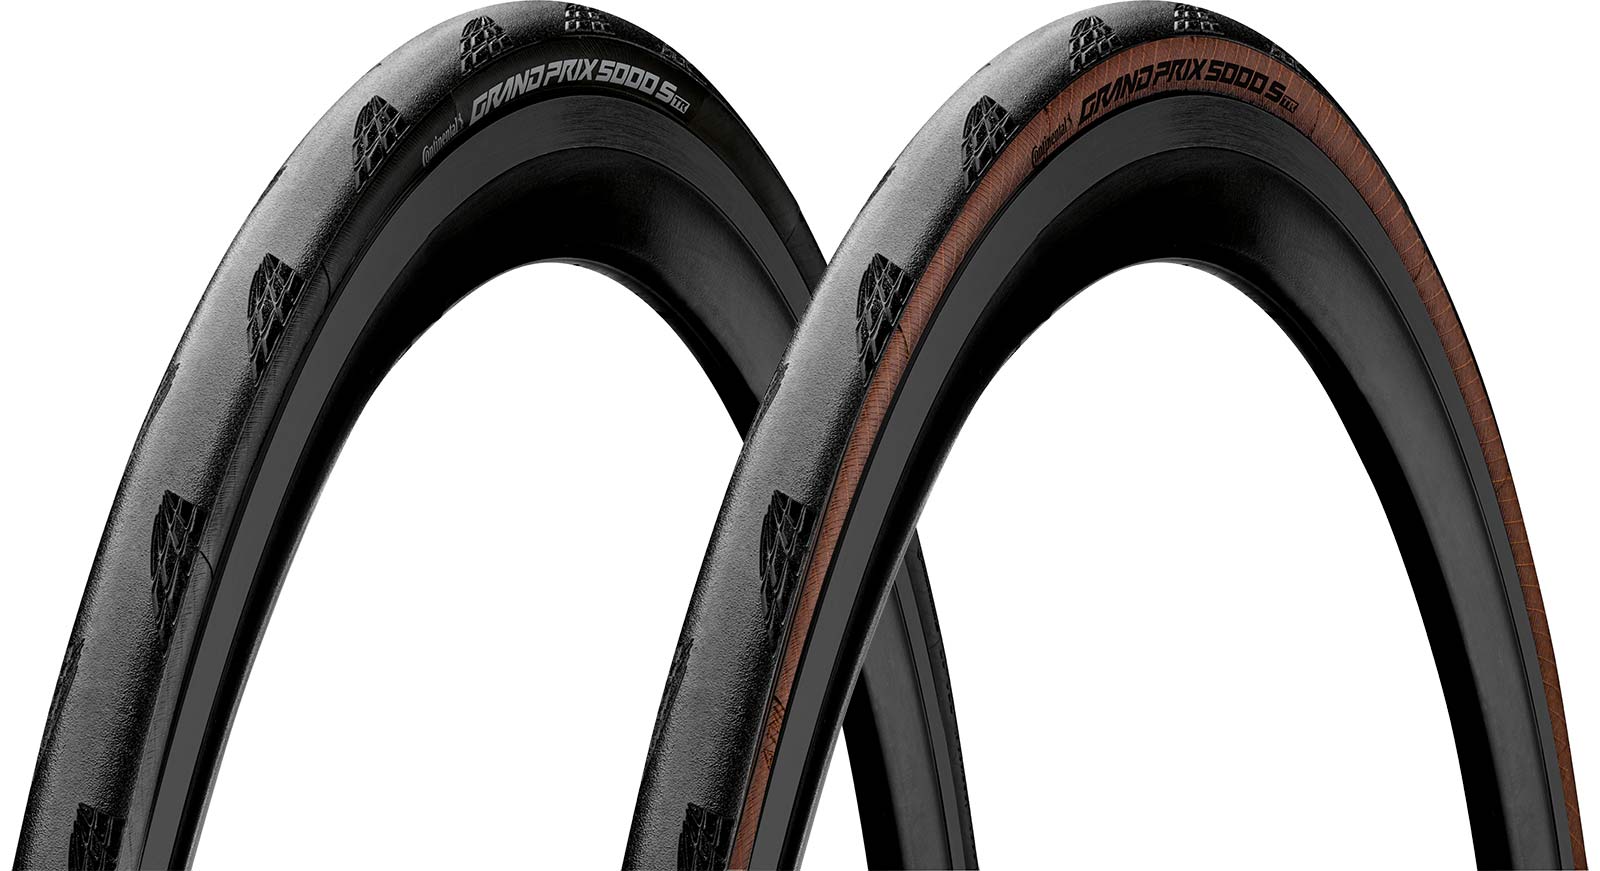 New Continental Grand Prix 5000 S TR is faster, hookless-compatible, and  already won Paris-Roubaix